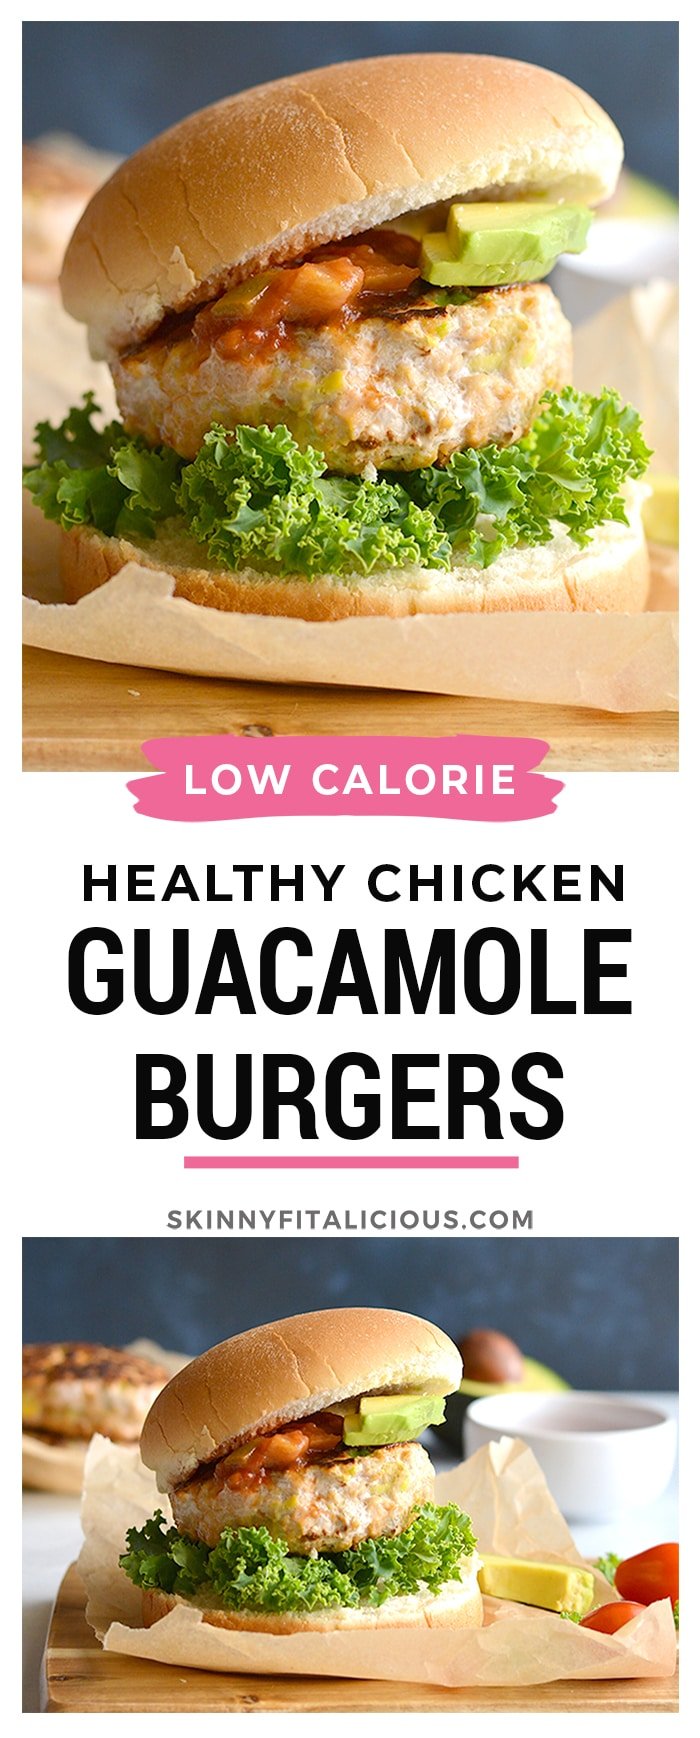 Chicken Guacamole Burgers! Stuffed with avocado and salsa, these easy burgers are juicy, tender and bursting with flavor. Take your traditional burgers up a notch with this EASY, healthy recipe. Low Carb + Paleo + Gluten Free + Low Calorie